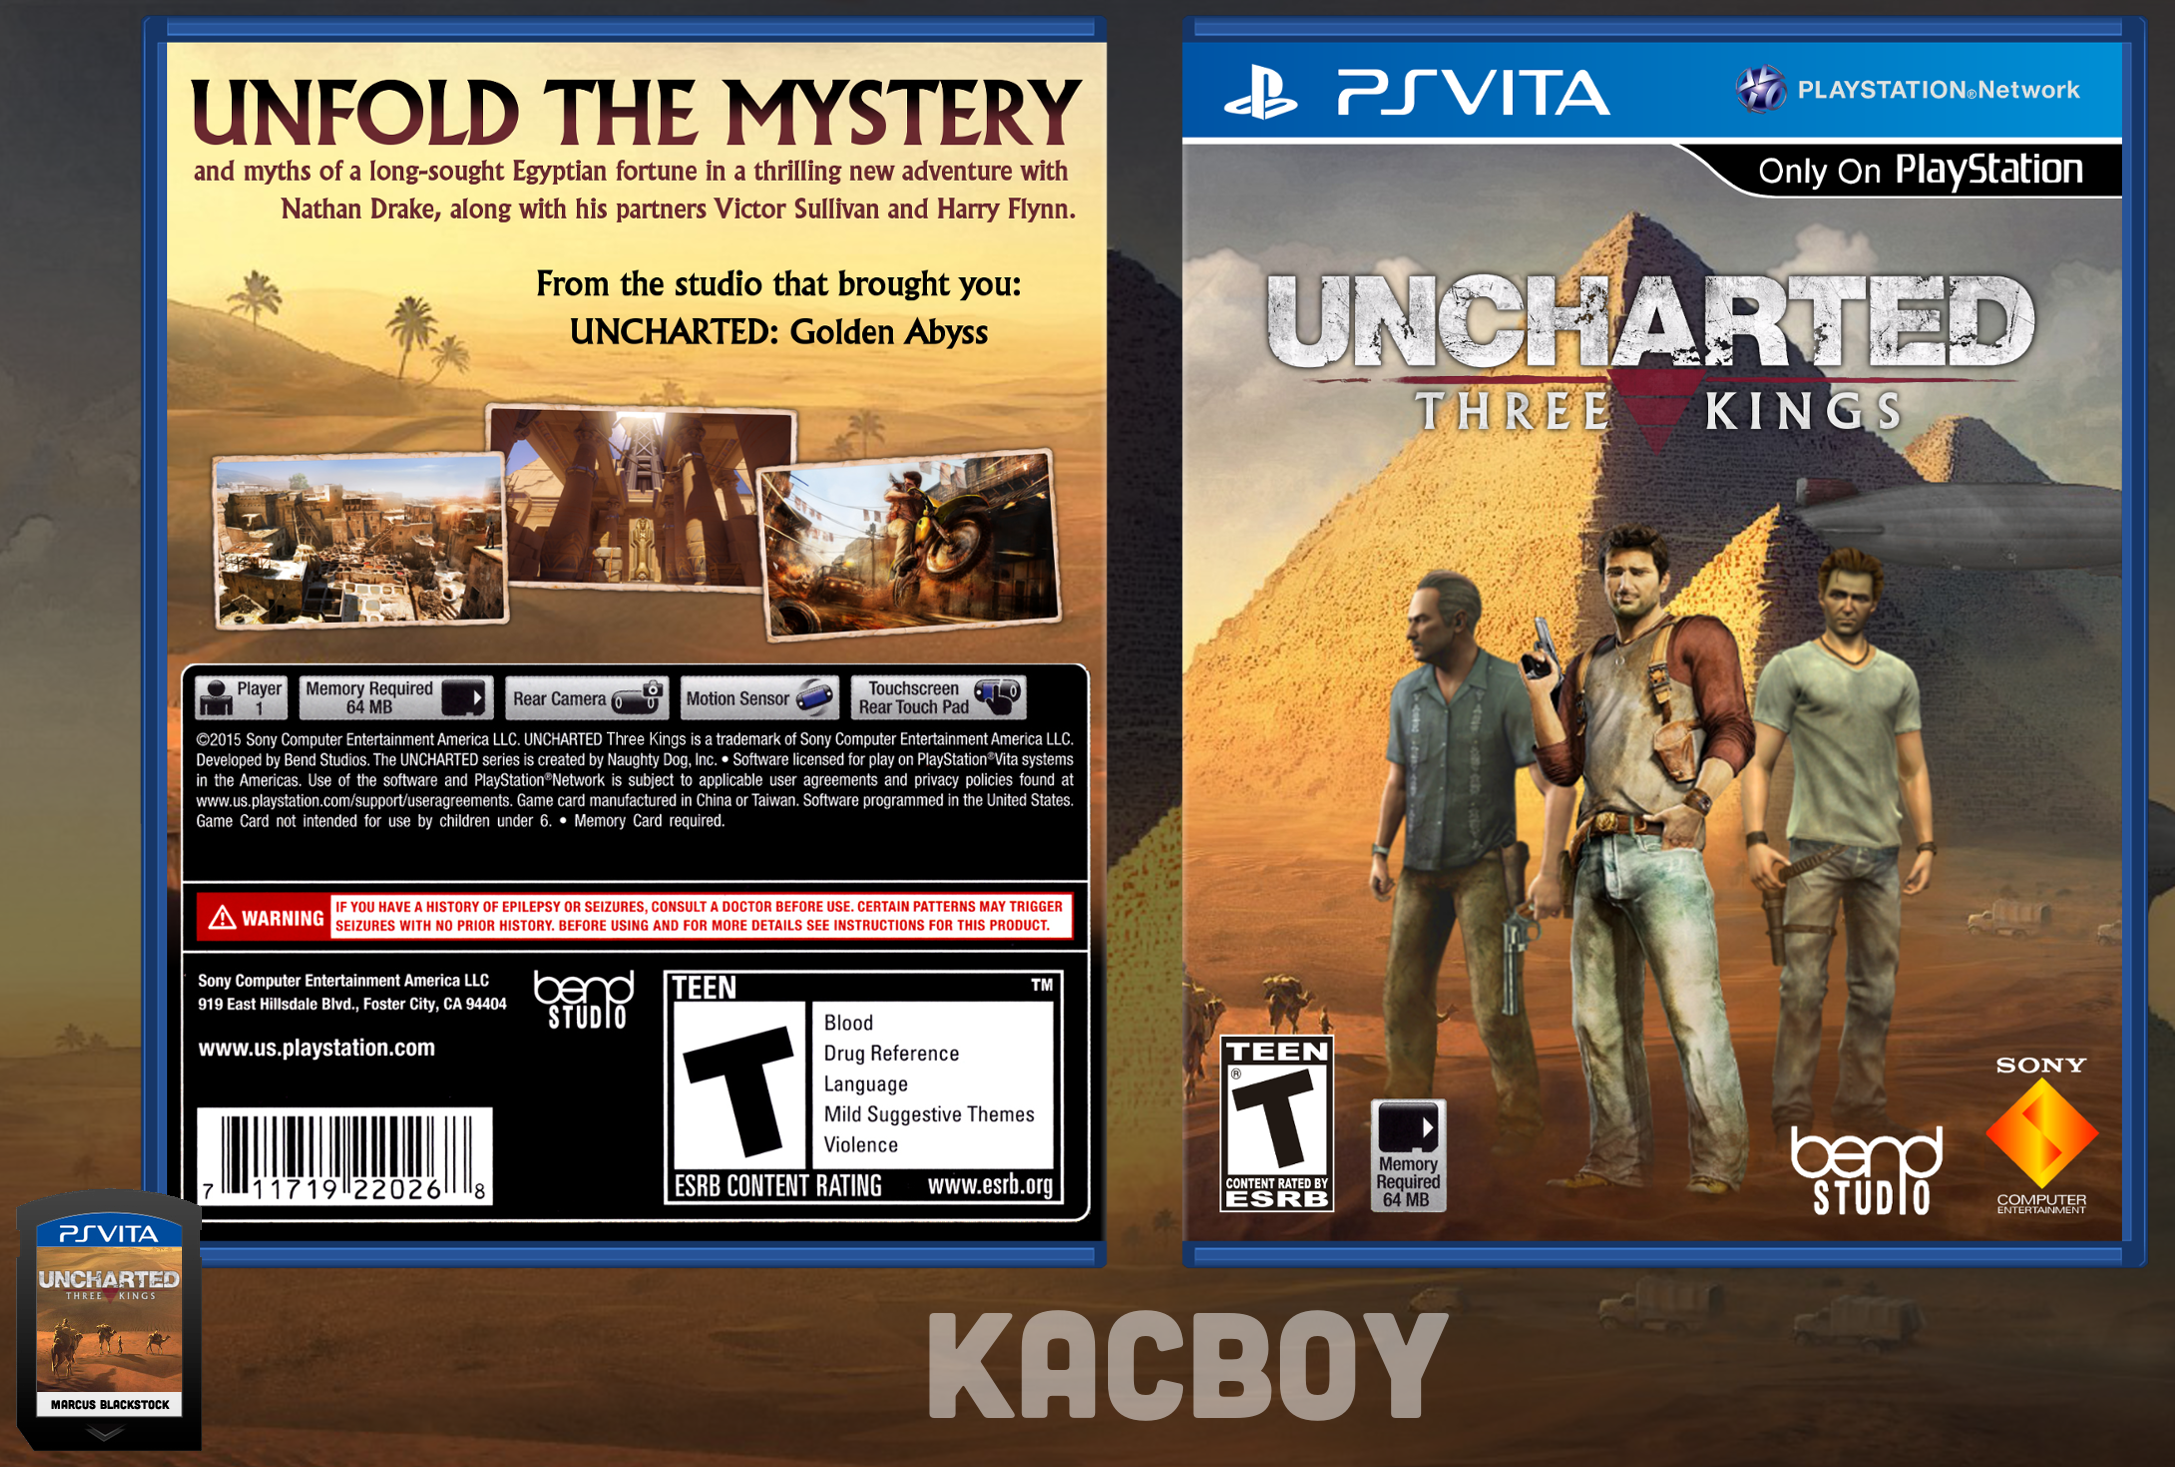 Uncharted: Three Kings box cover